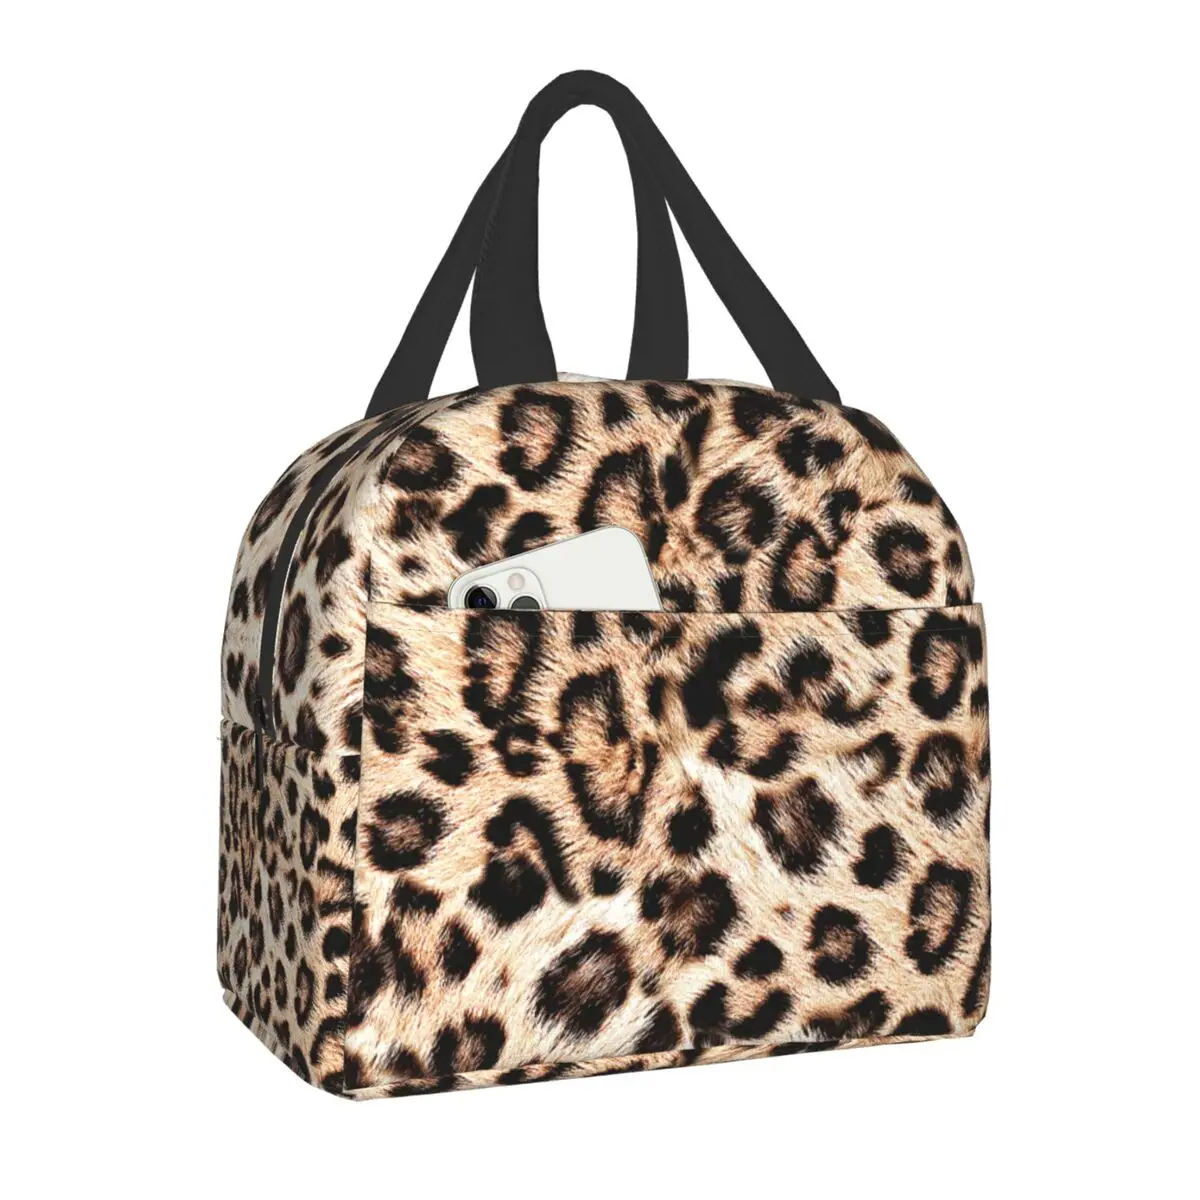 Leopard Print Insulated Lunch Tote Bag for Women Animal Skin Portable Cooler Thermal Food Lunch Box Kids School Food Picnic Bags